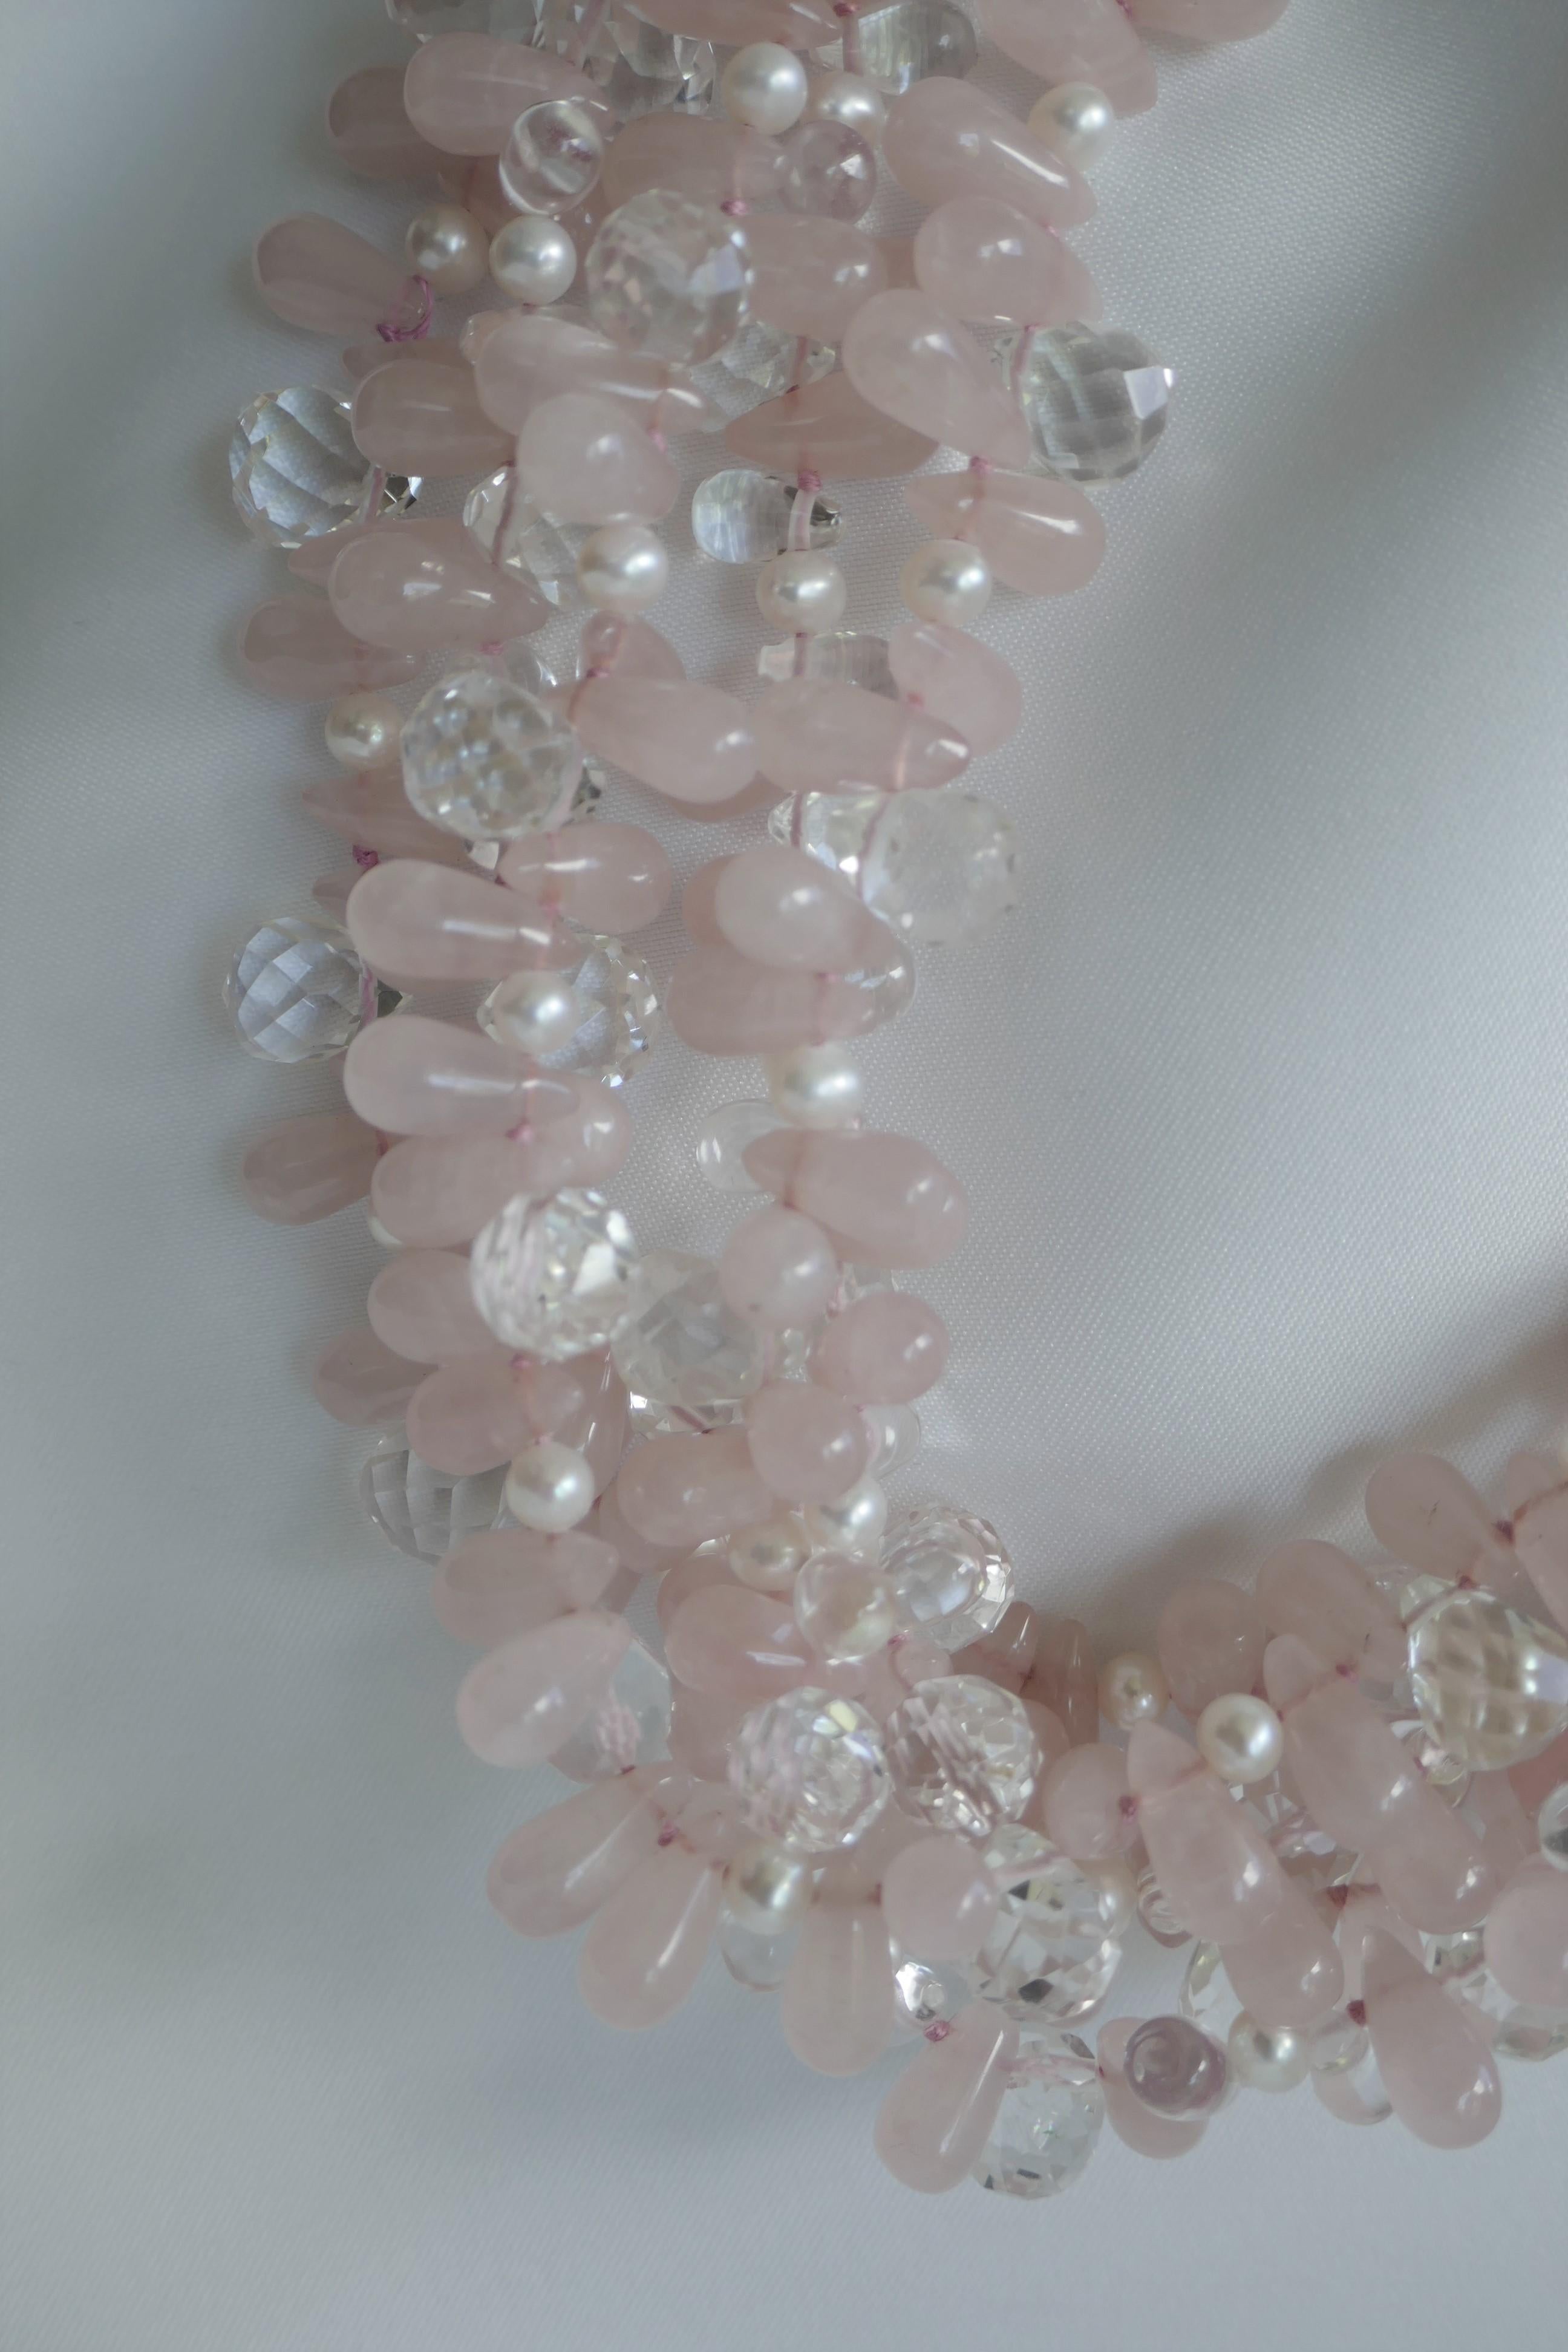 This multi strand (5 strand) rose quartz, rock crystal and white cultured fresh pearl necklace is a statement piece that looks beautiful on. The necklace given the luminosity of the faceted rock crystal and rock crystal briolettes bring this